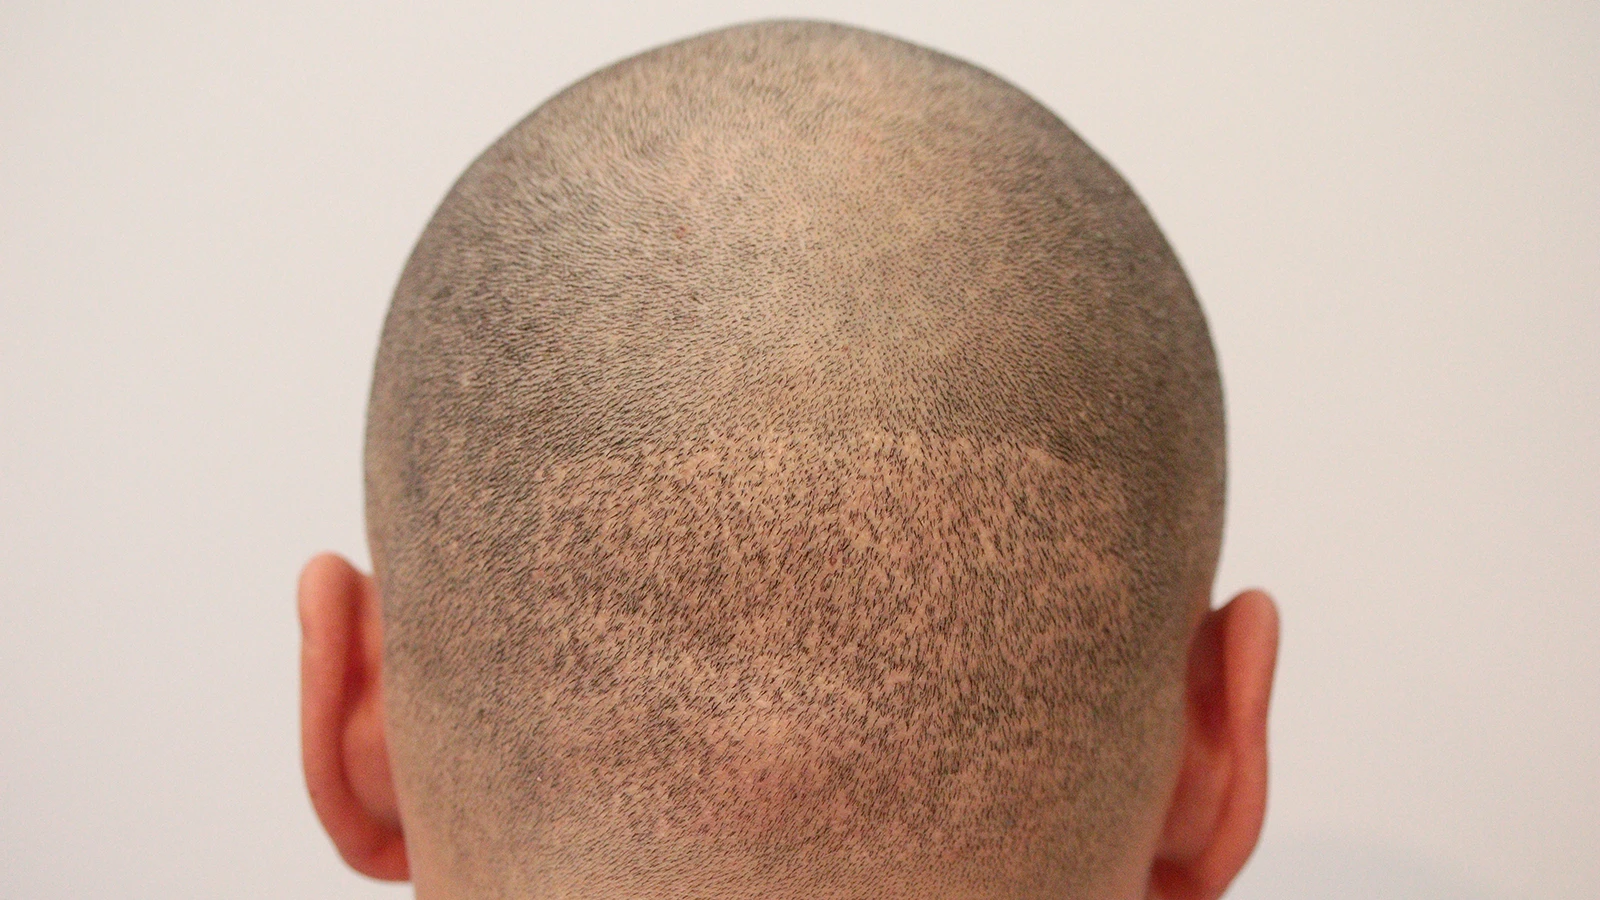 FUE Hair transplant - what to expect and alternatives